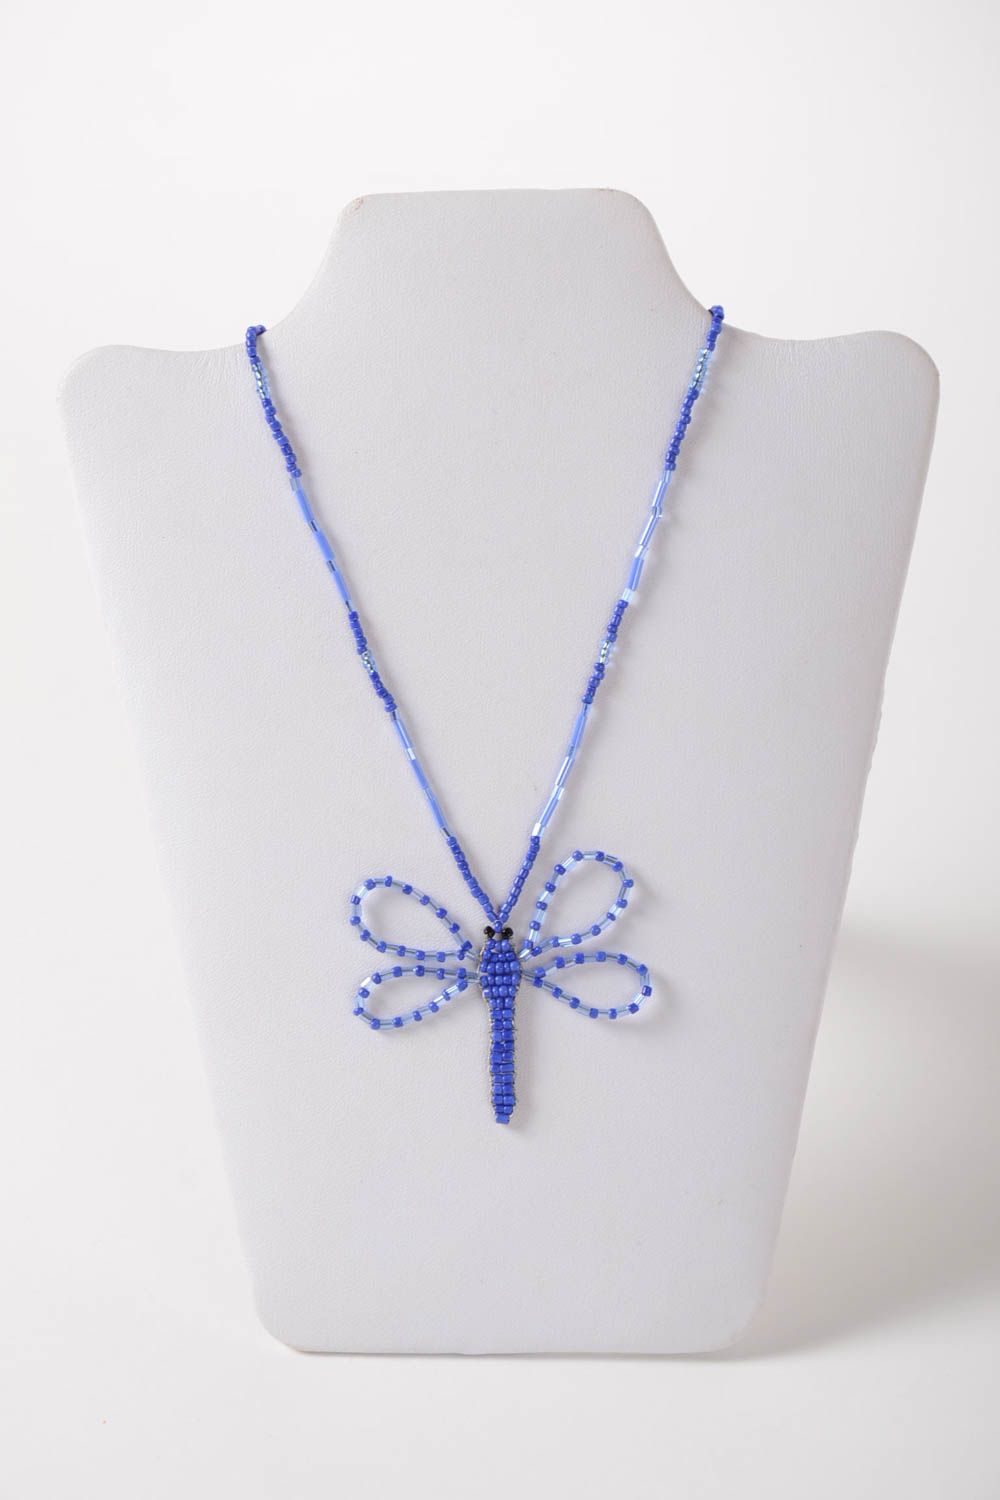 Bead necklace handcrafted jewelry dragonfly necklace gifts for kids photo 2